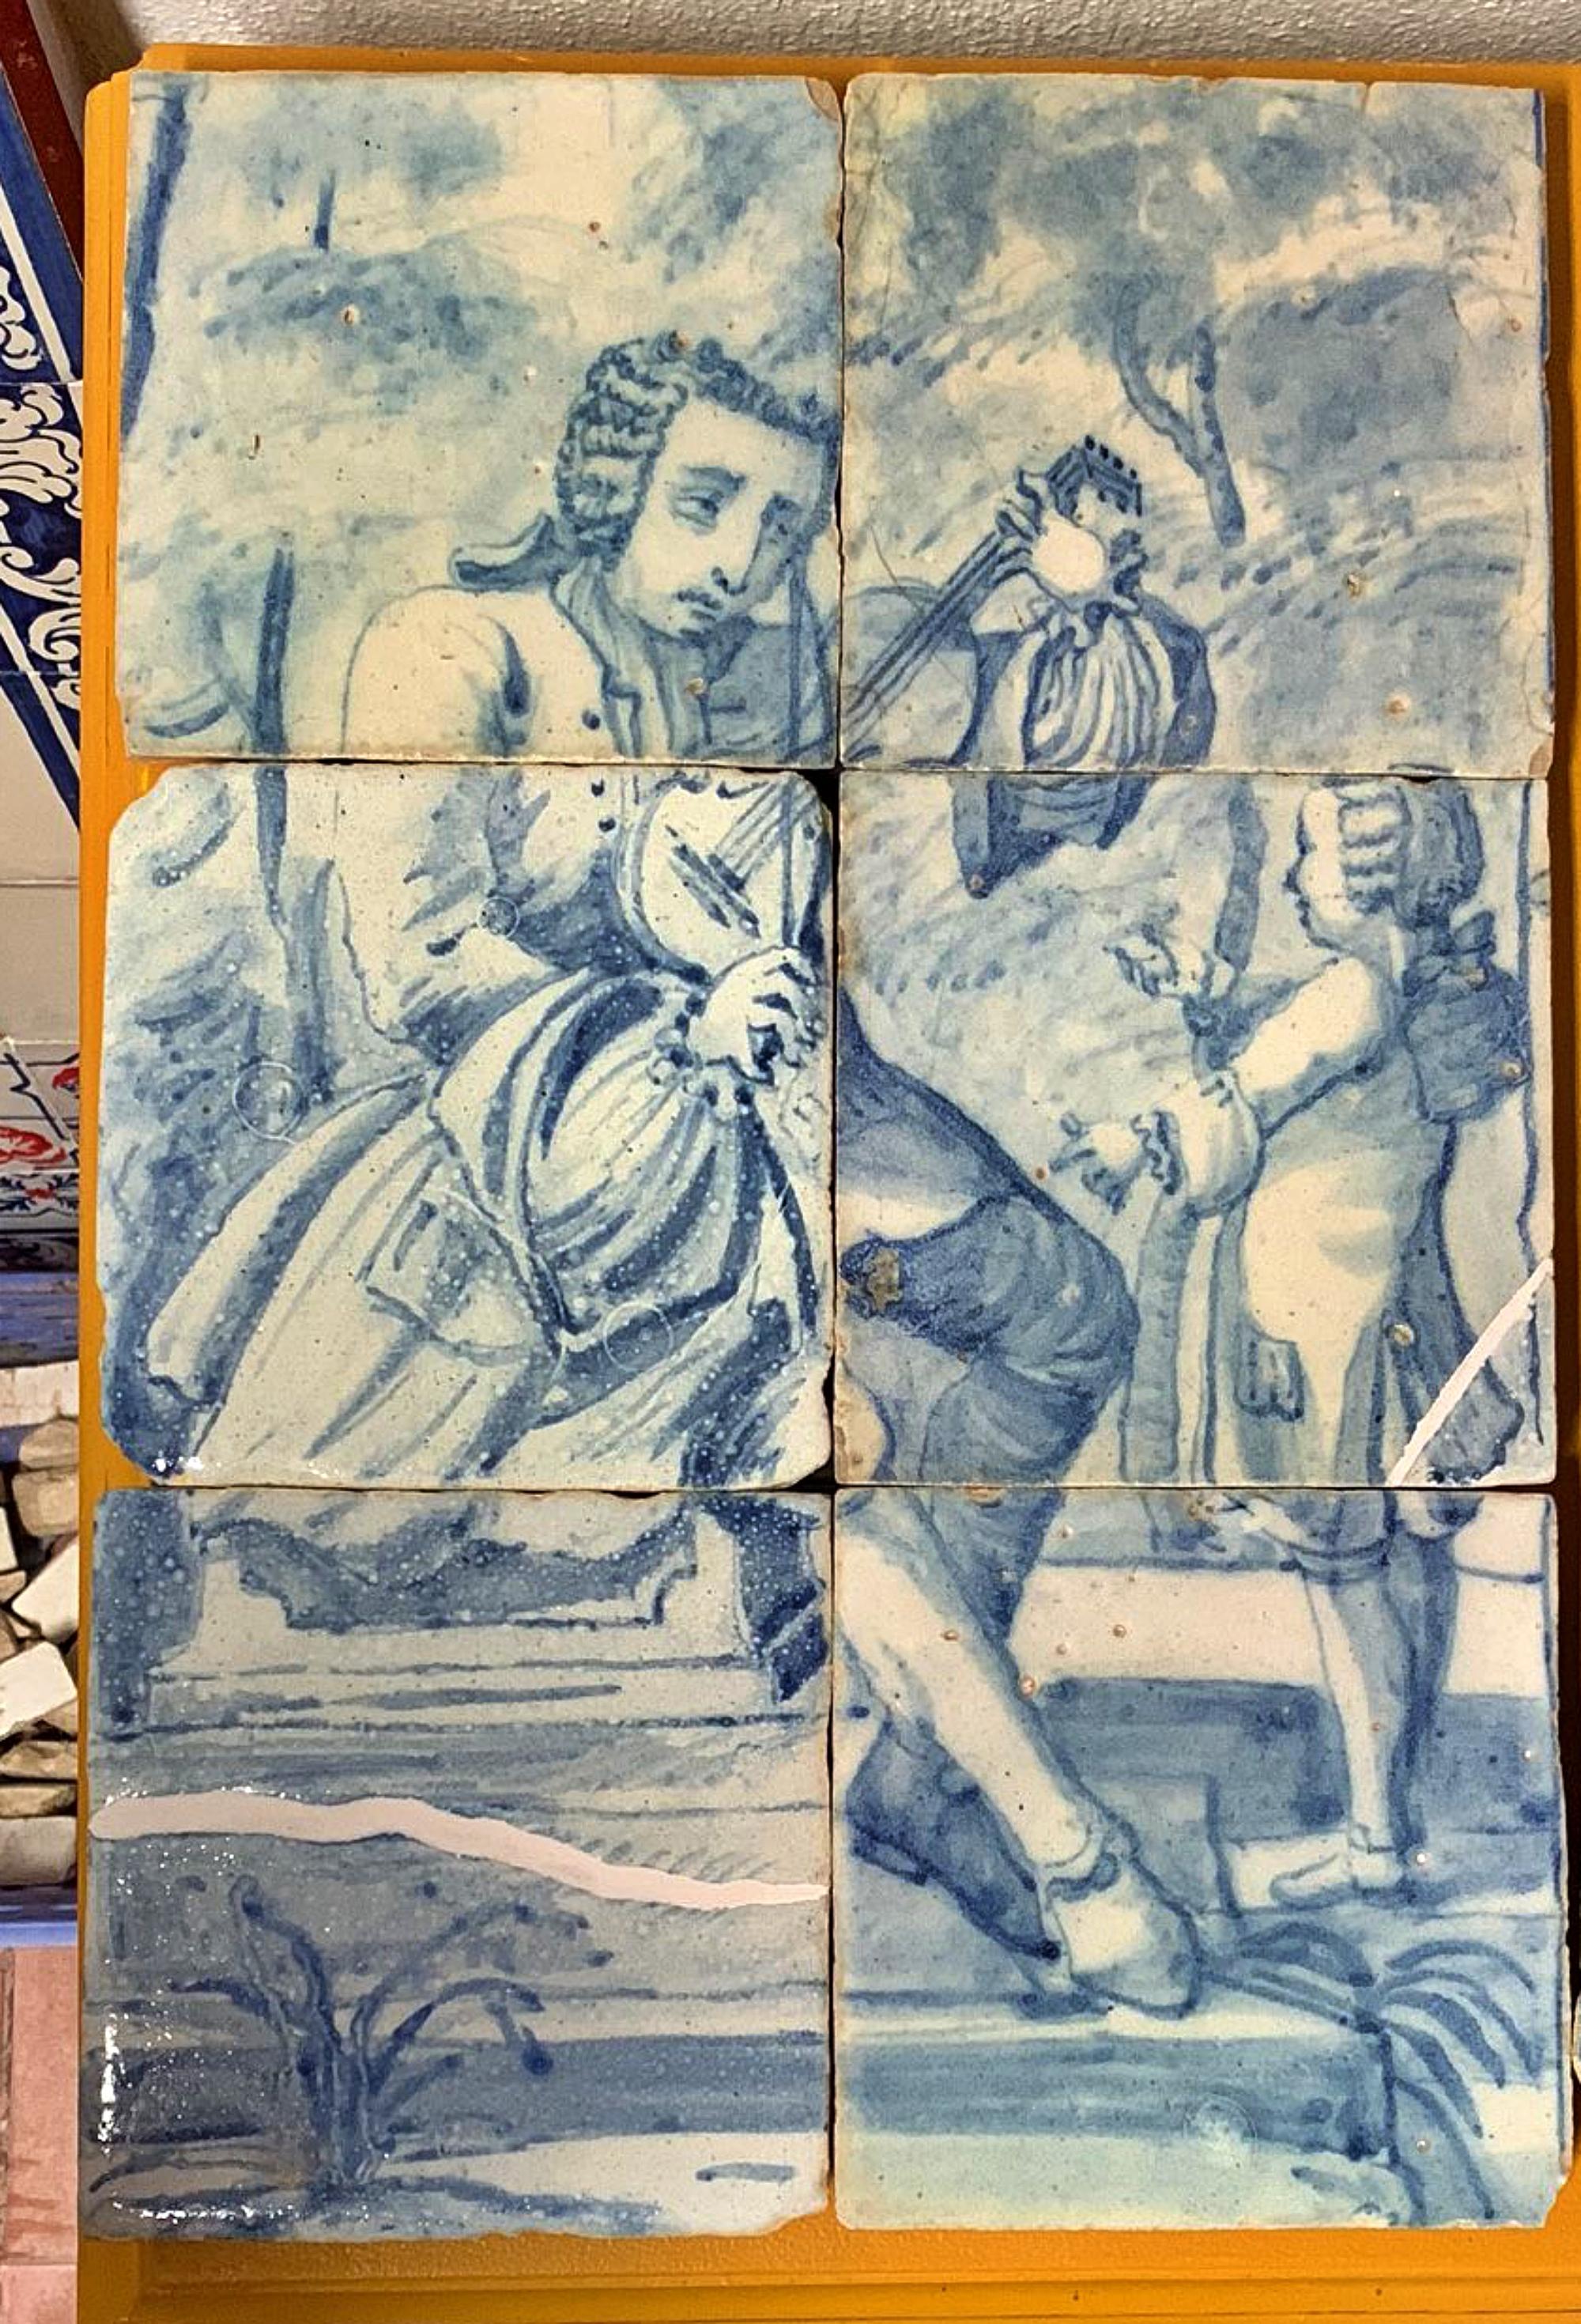 Hand-Crafted 17th Century Portuguese Tile Panel Representing 